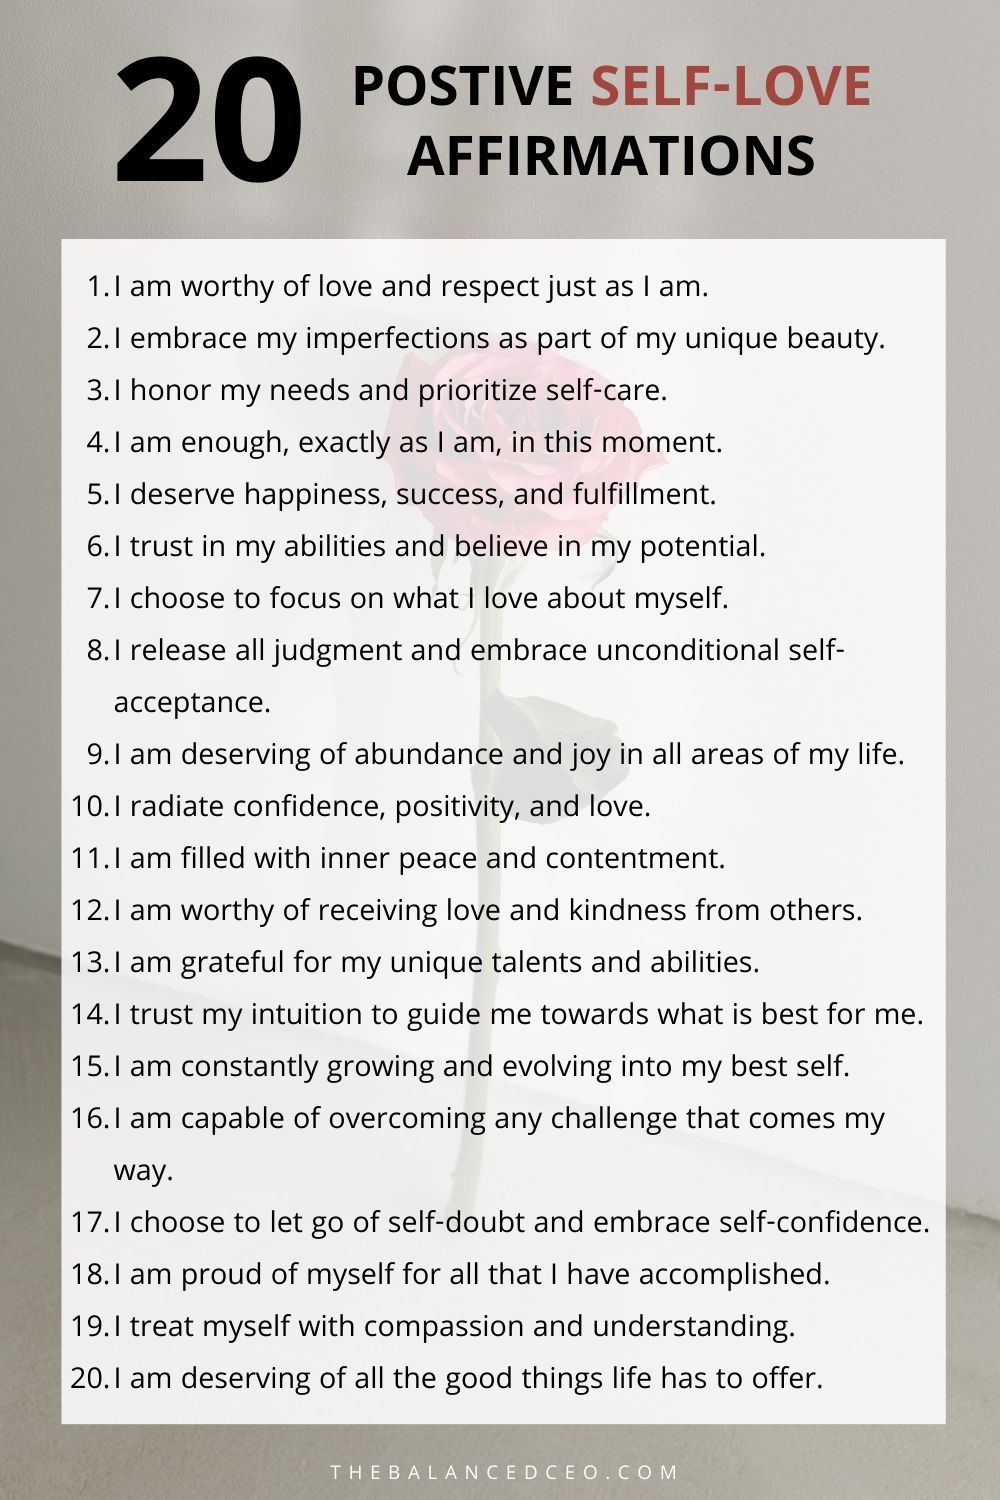 20 Powerful Positive Affirmations for Self-Love